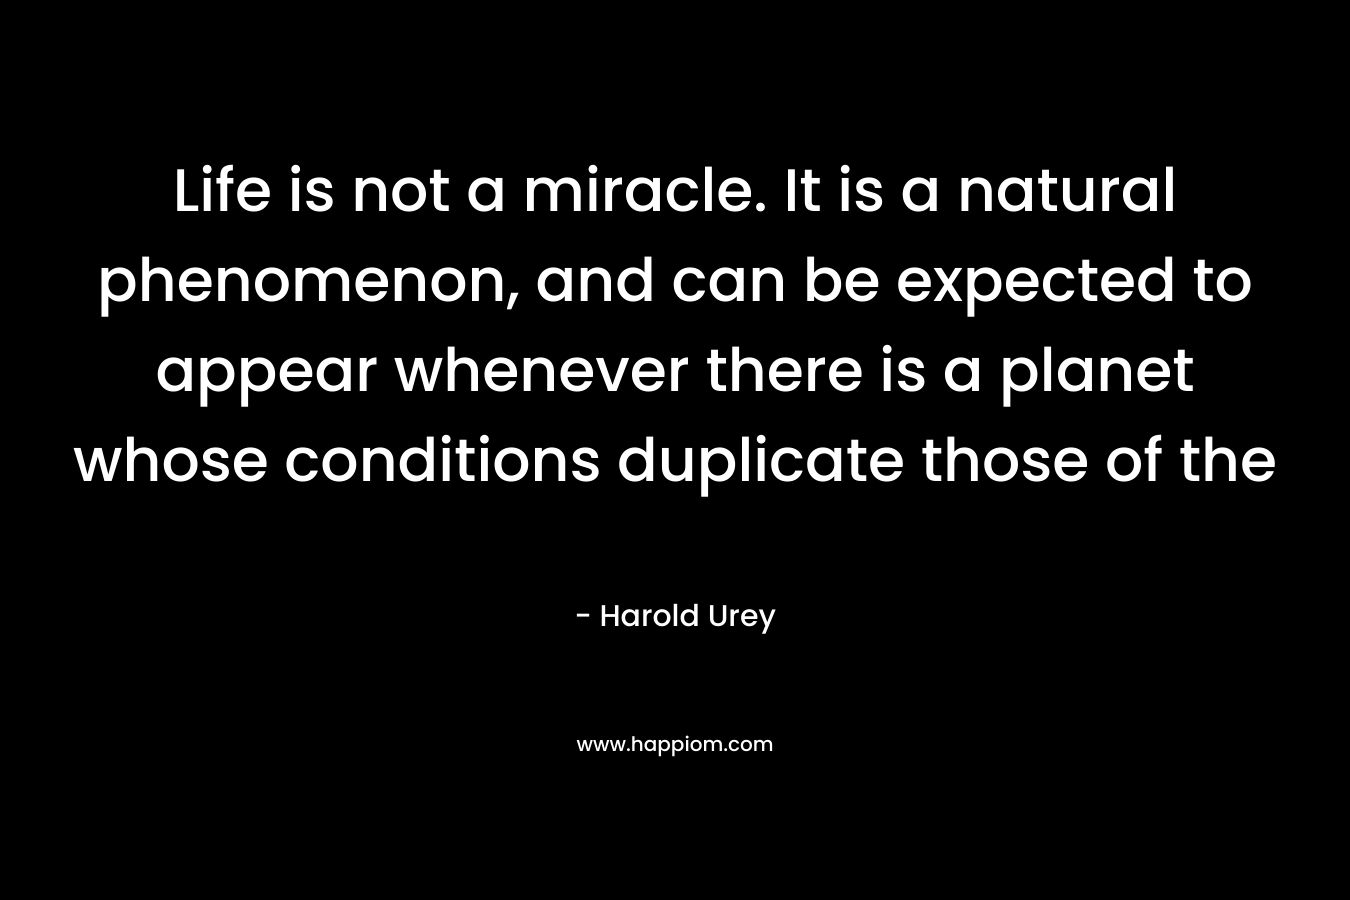 Life is not a miracle. It is a natural phenomenon, and can be expected to appear whenever there is a planet whose conditions duplicate those of the 